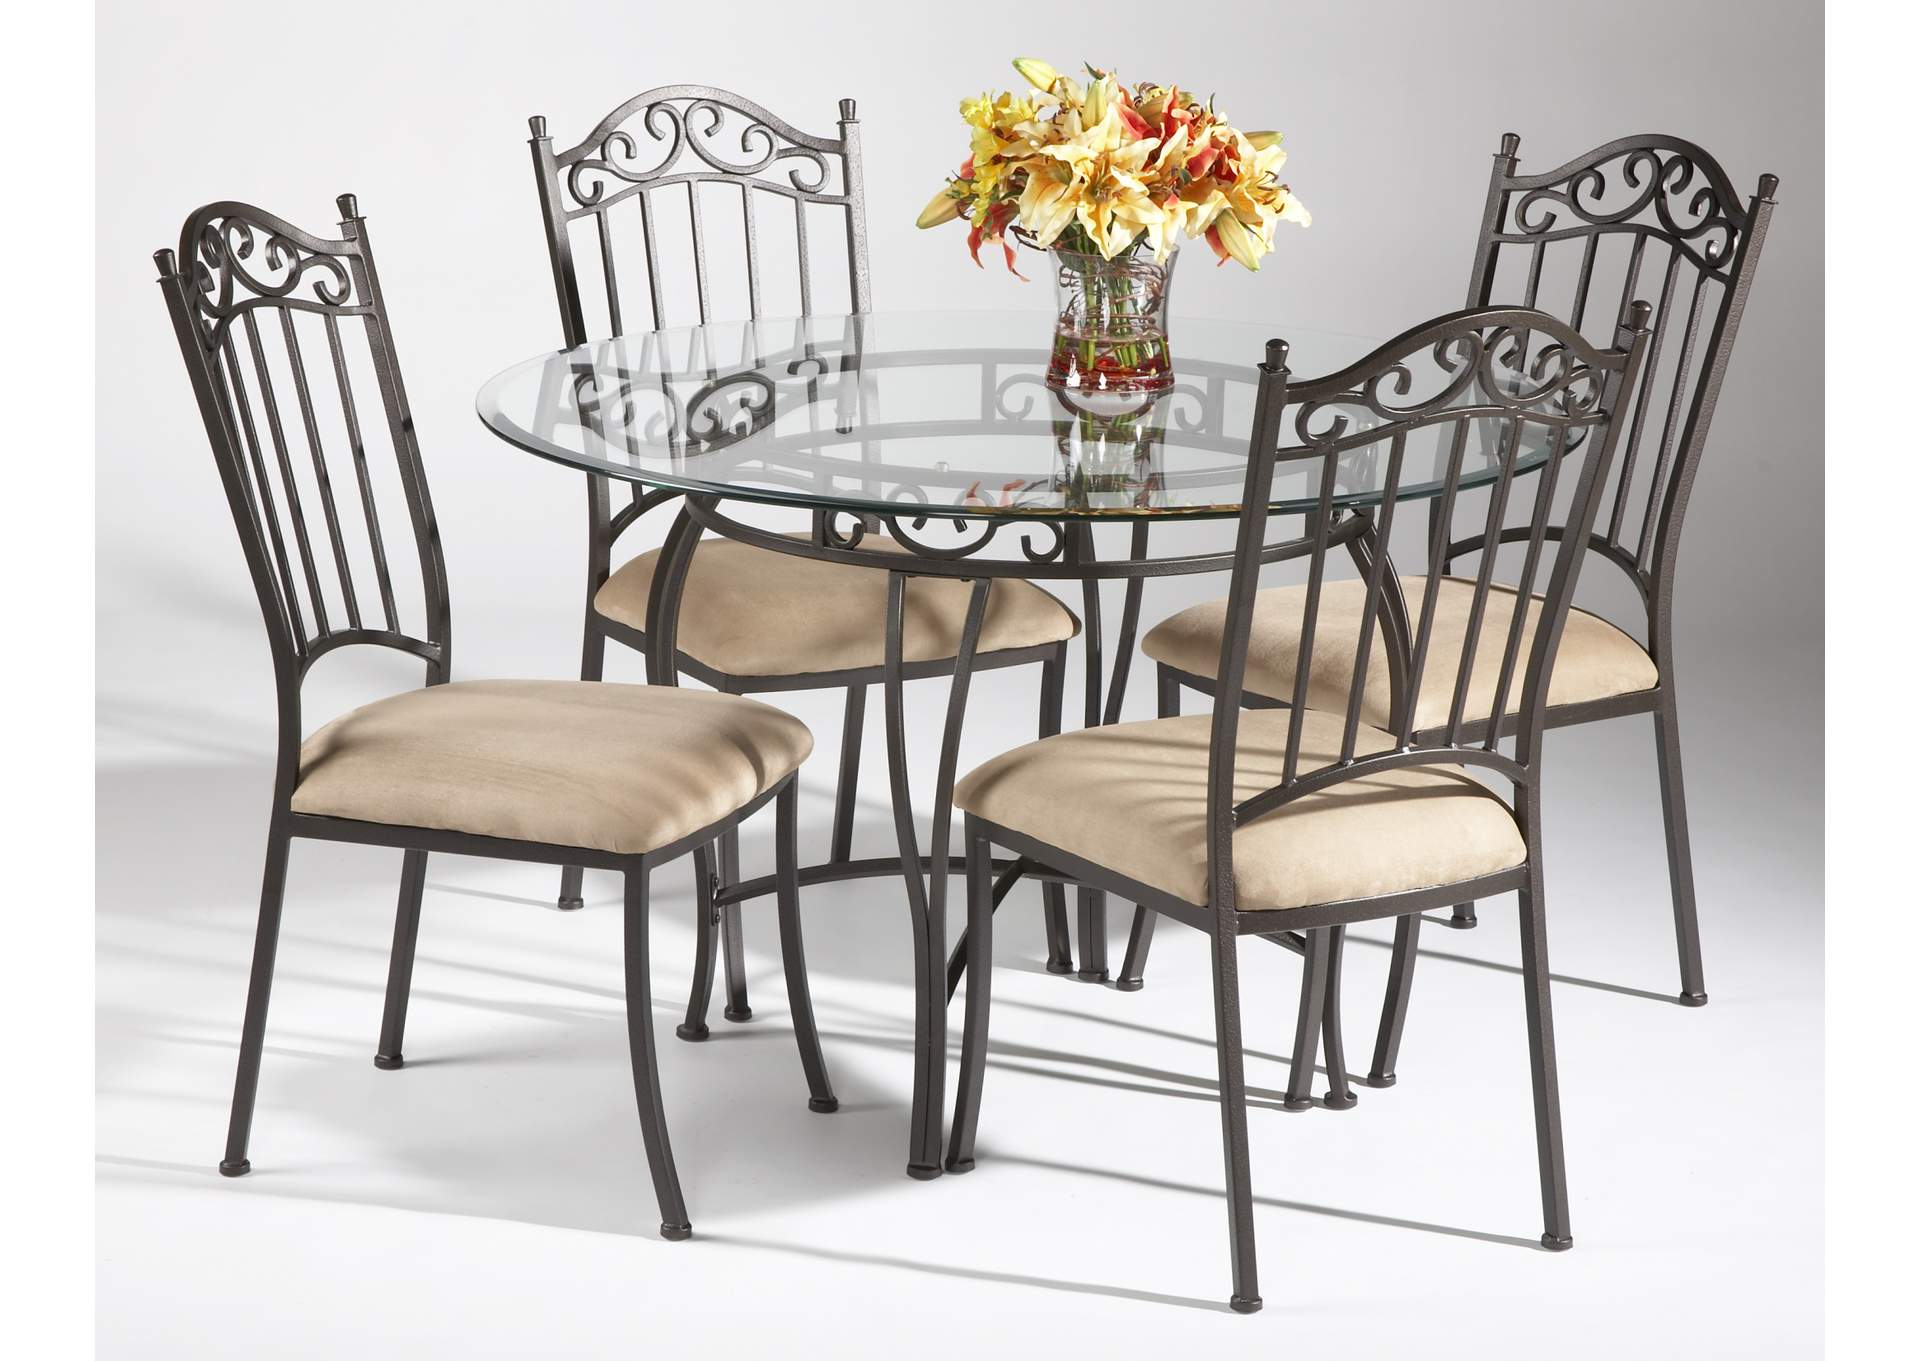 Wrought Iron Base Harlem Furniture, Vintage Wrought Iron Dining Table And Chairs